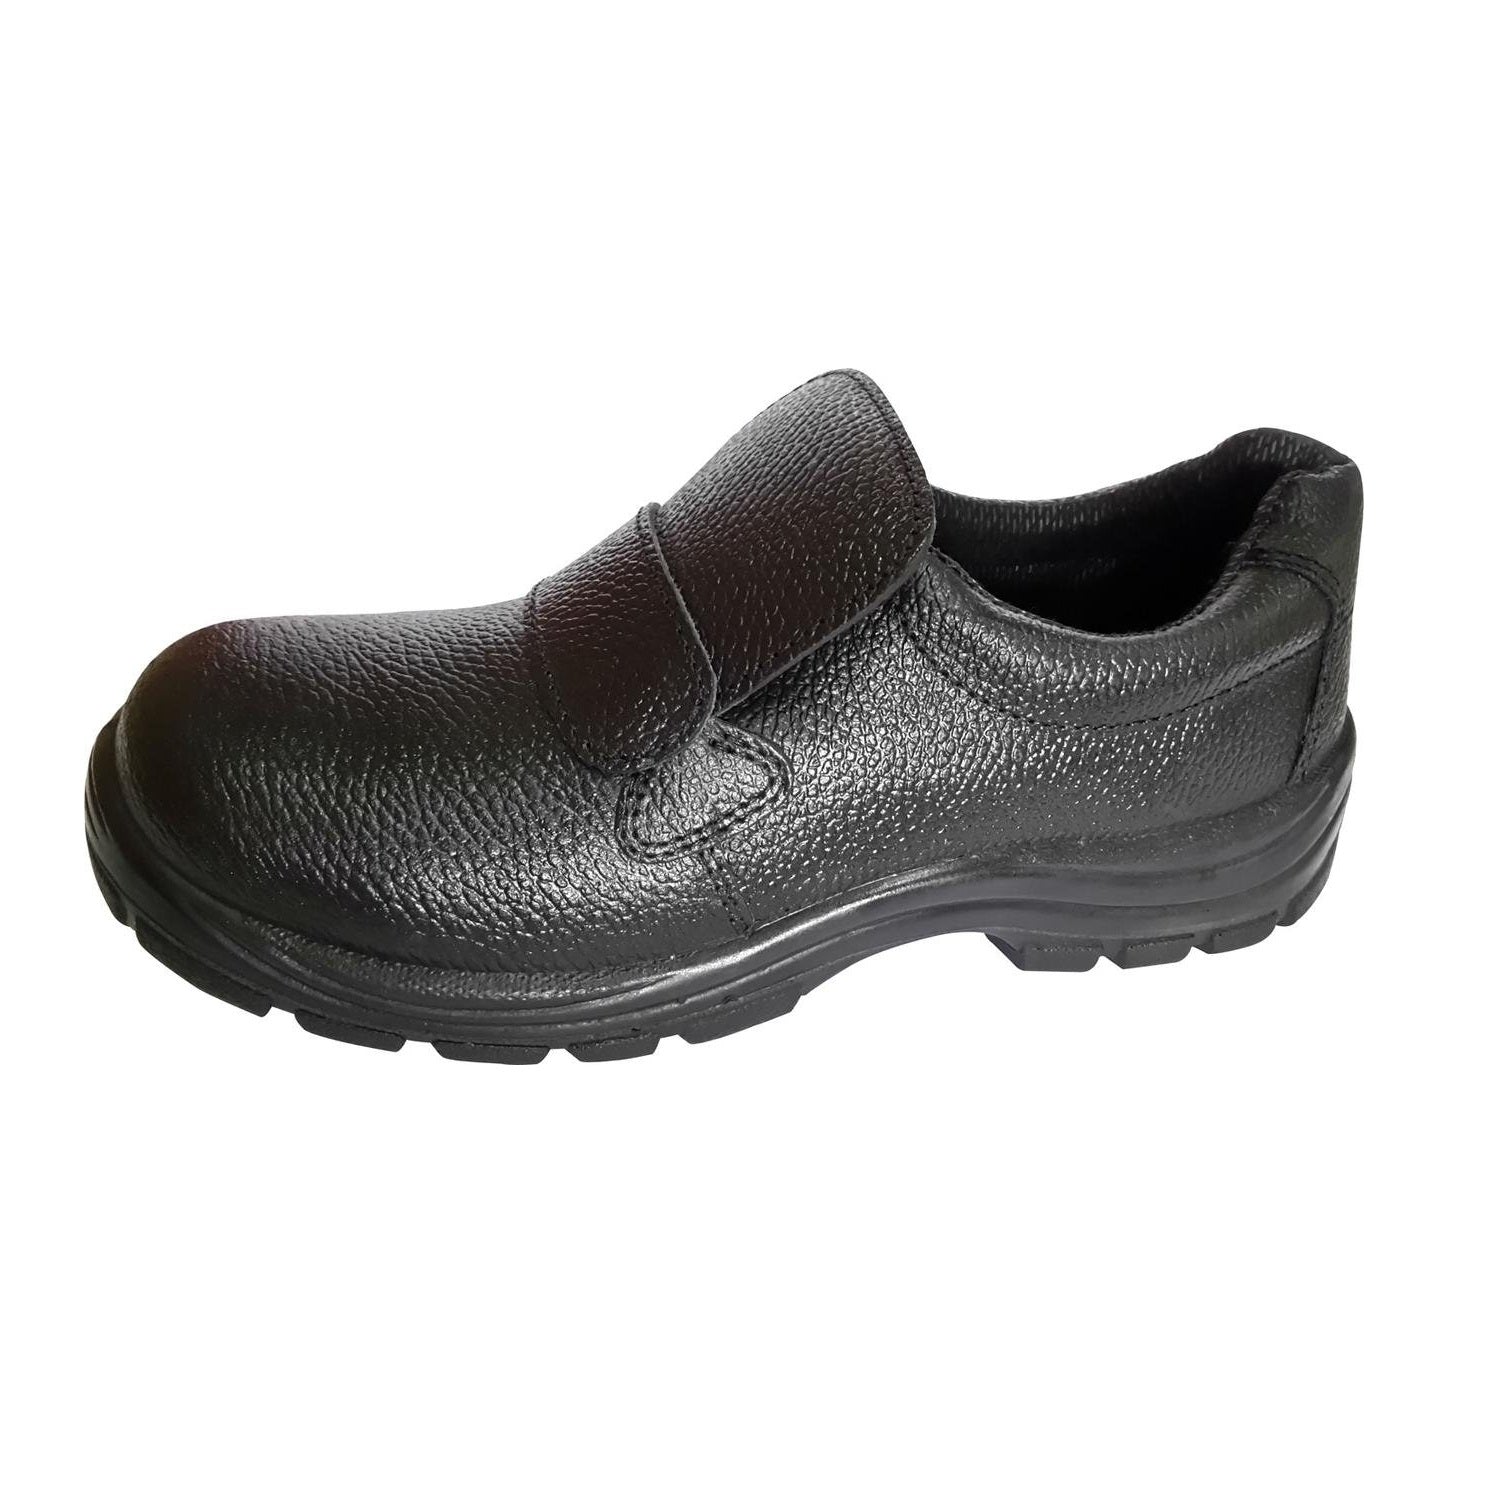 Emperor Slip-on Model Leather Safety Shoe without Lace SLIP-ON